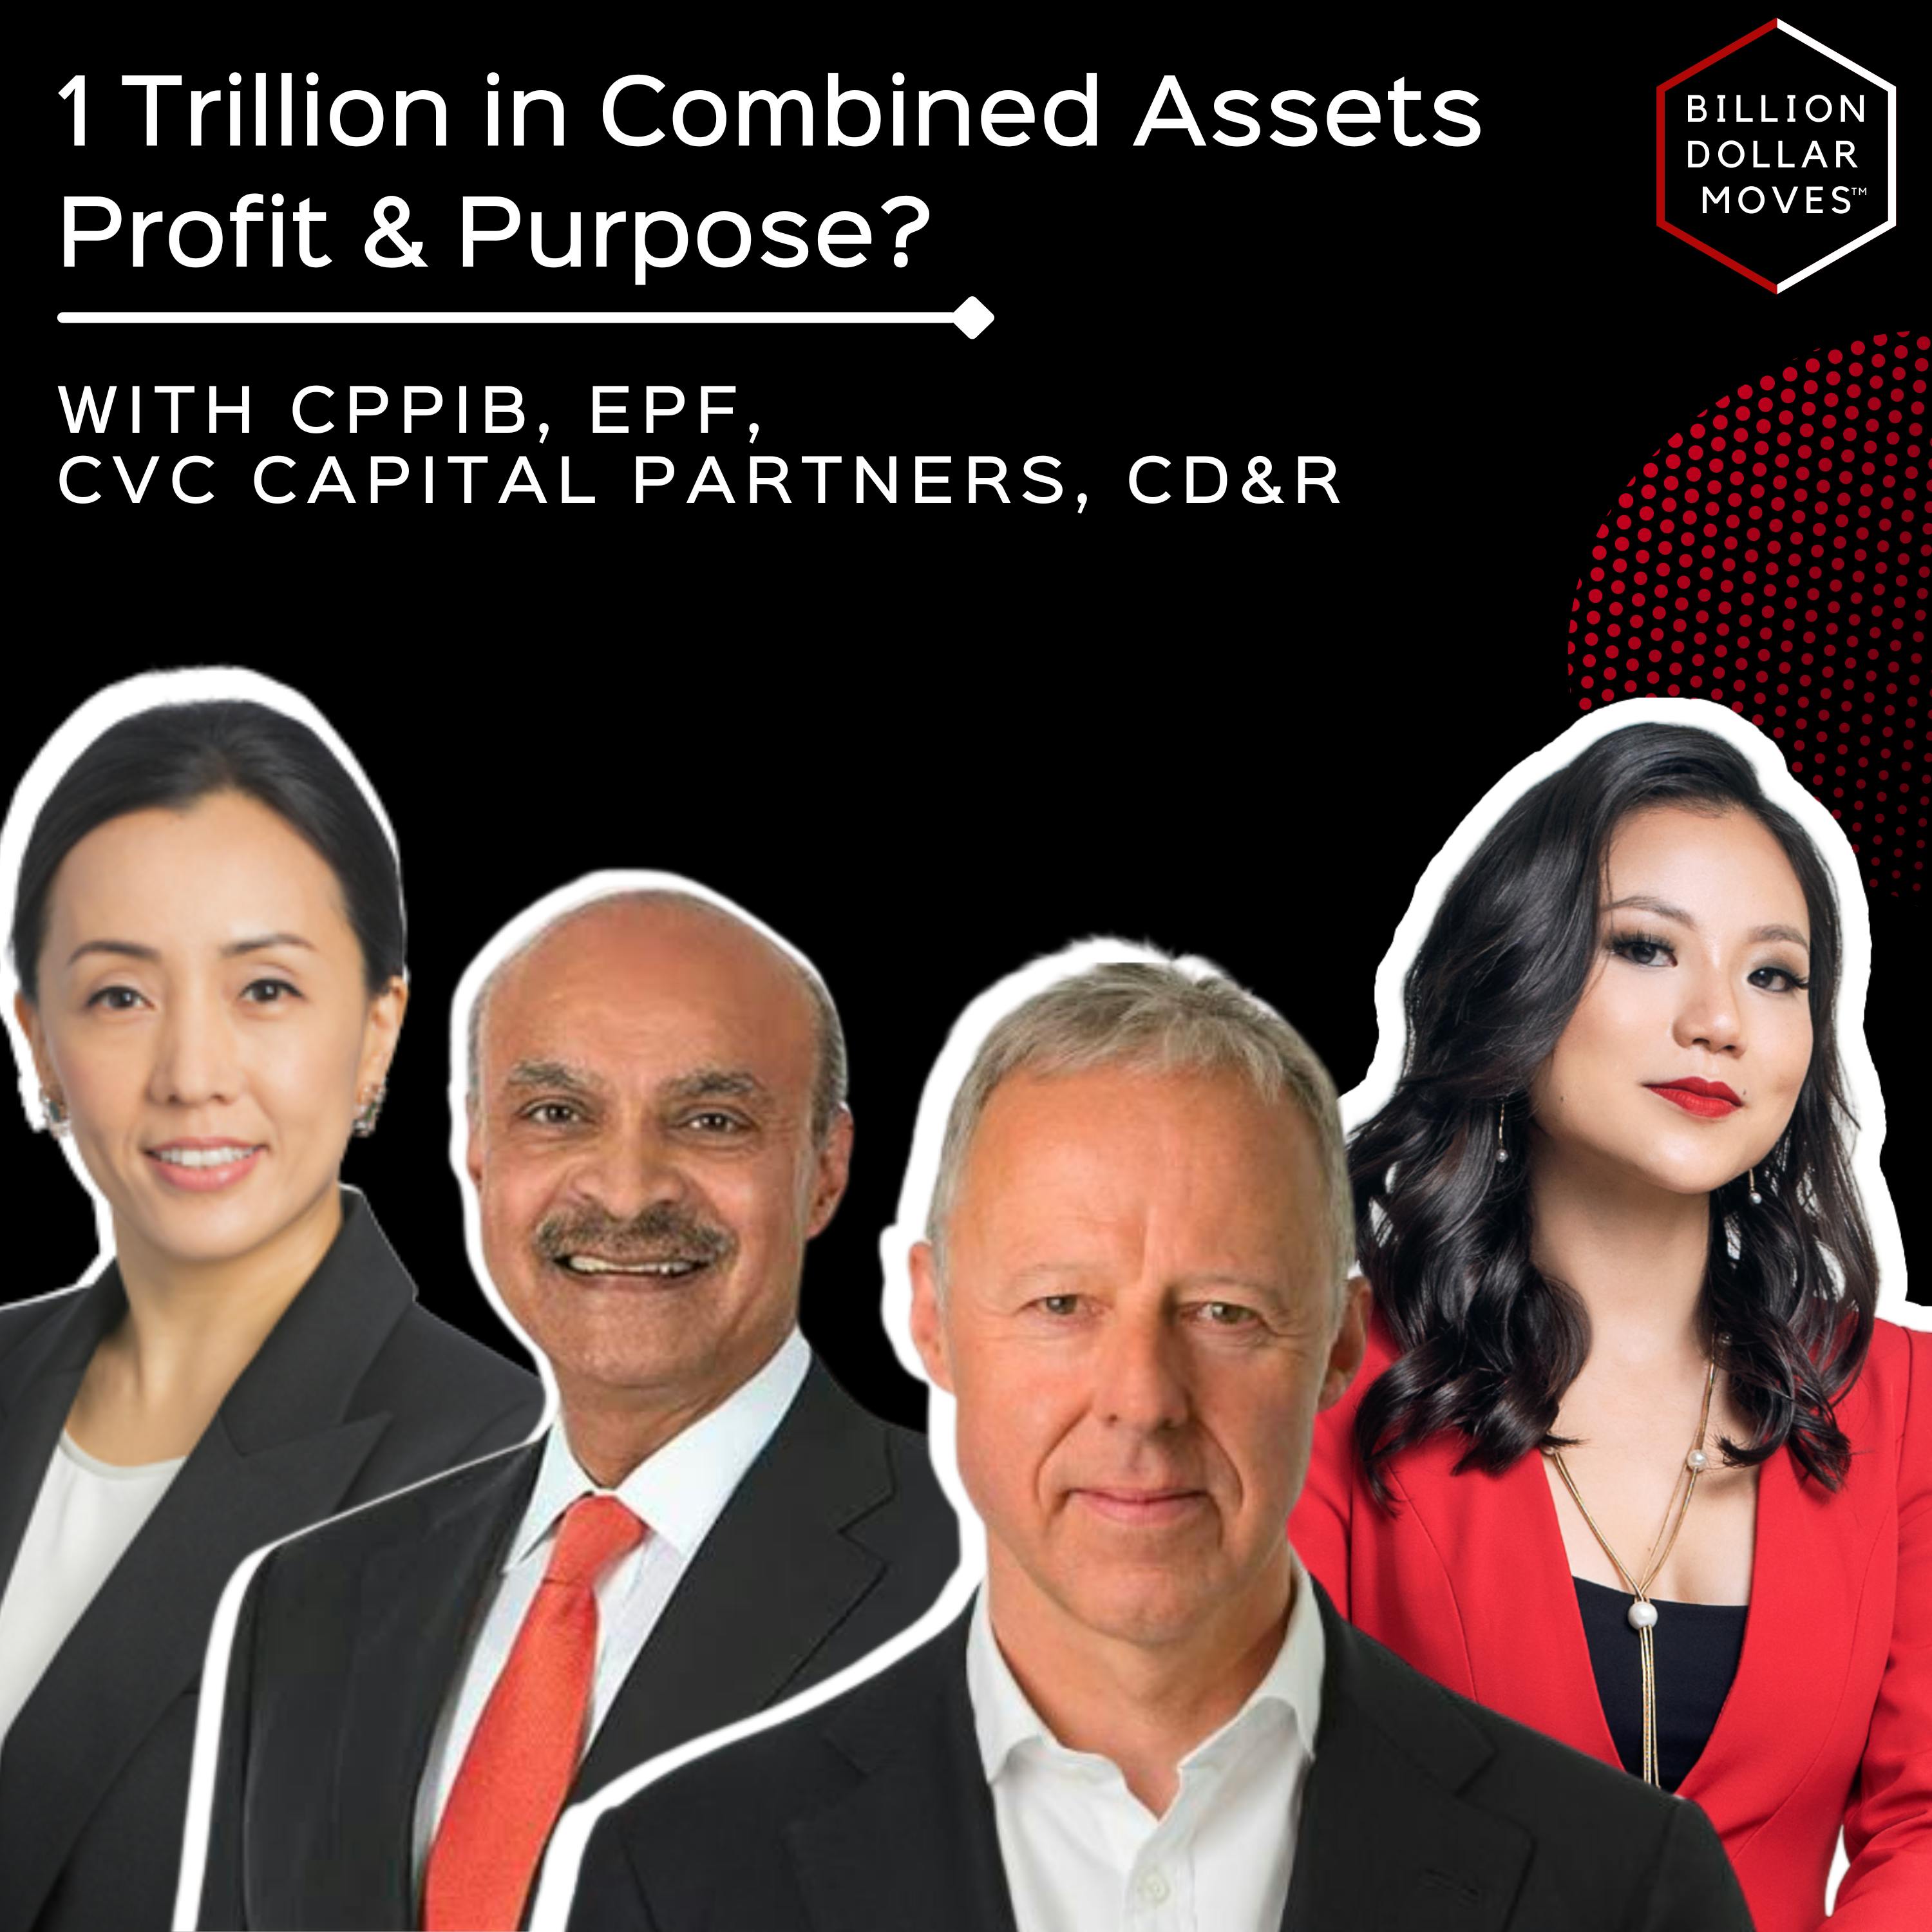 Multi-Billion Firms' Chief Investors, CPP Investments, CVC Capital Partners, EPF, CD&R on Actually Aligning Profit & Purpose in Private Equity — Davos Takeaway 3 {BONUS}